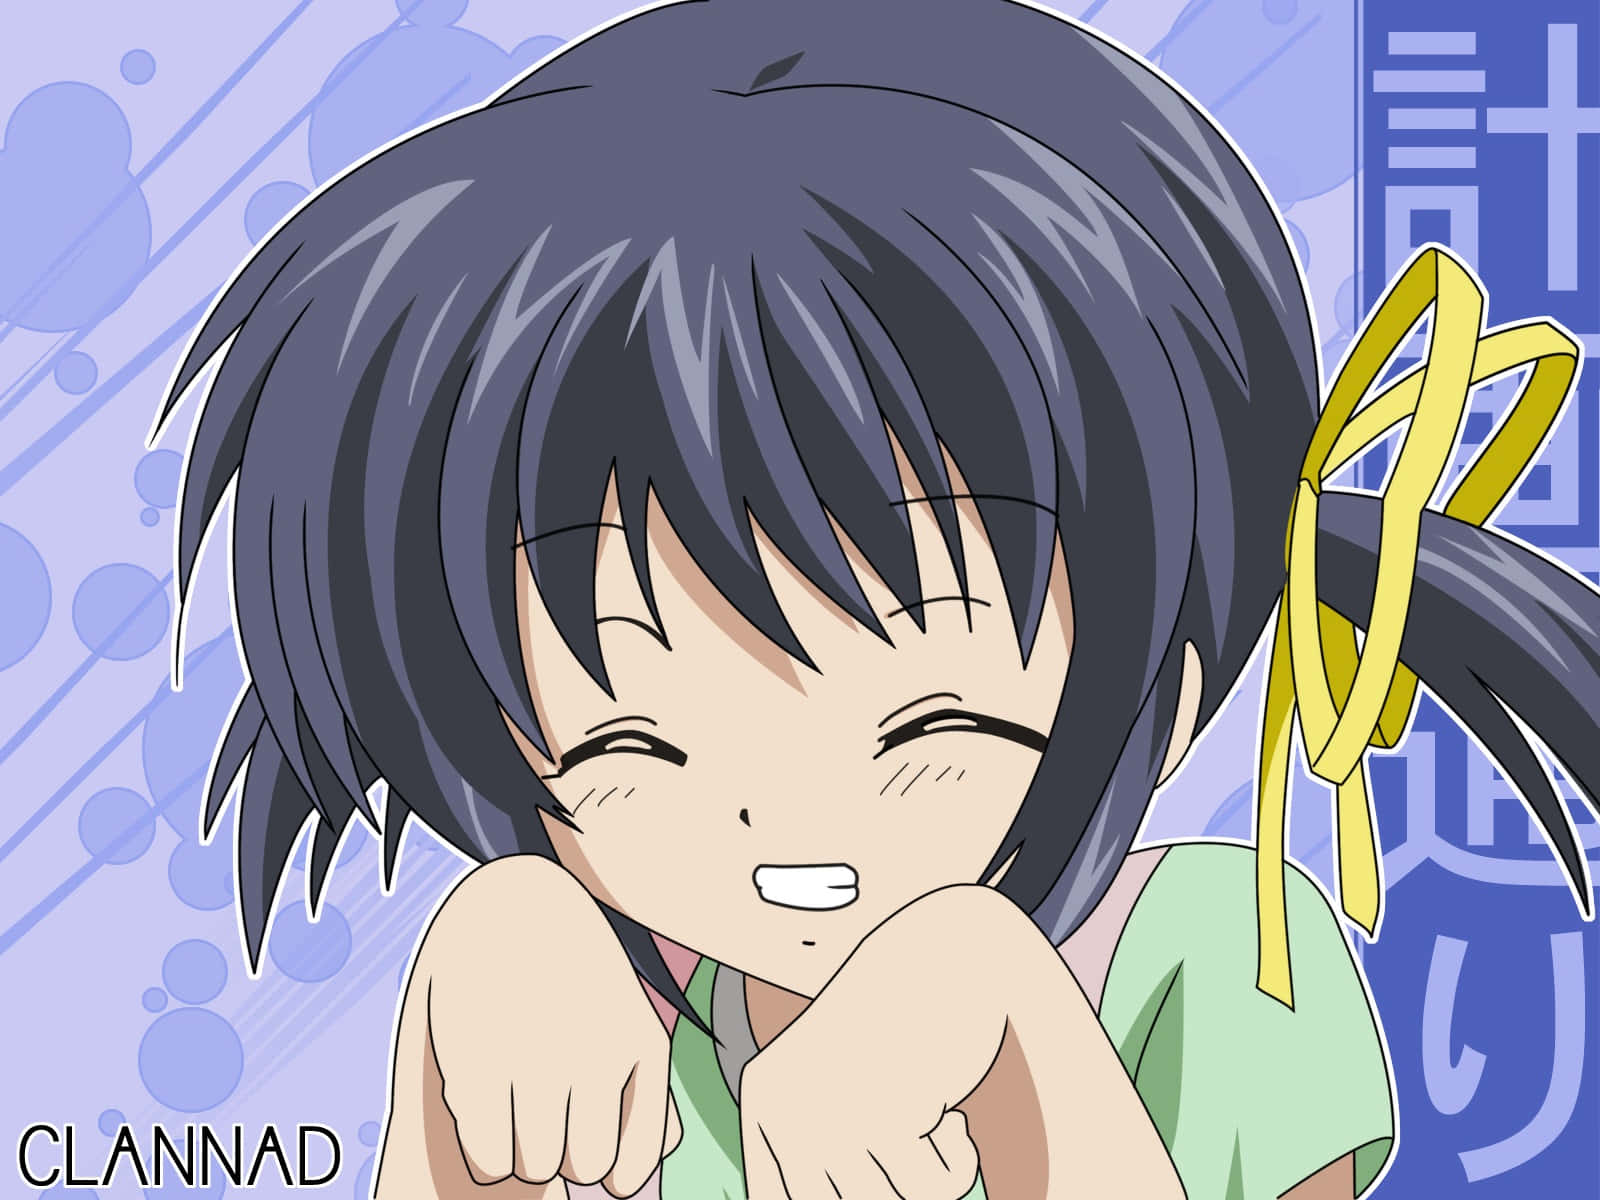 Mei Sunohara - The Intriguing Character From Clannad Wallpaper